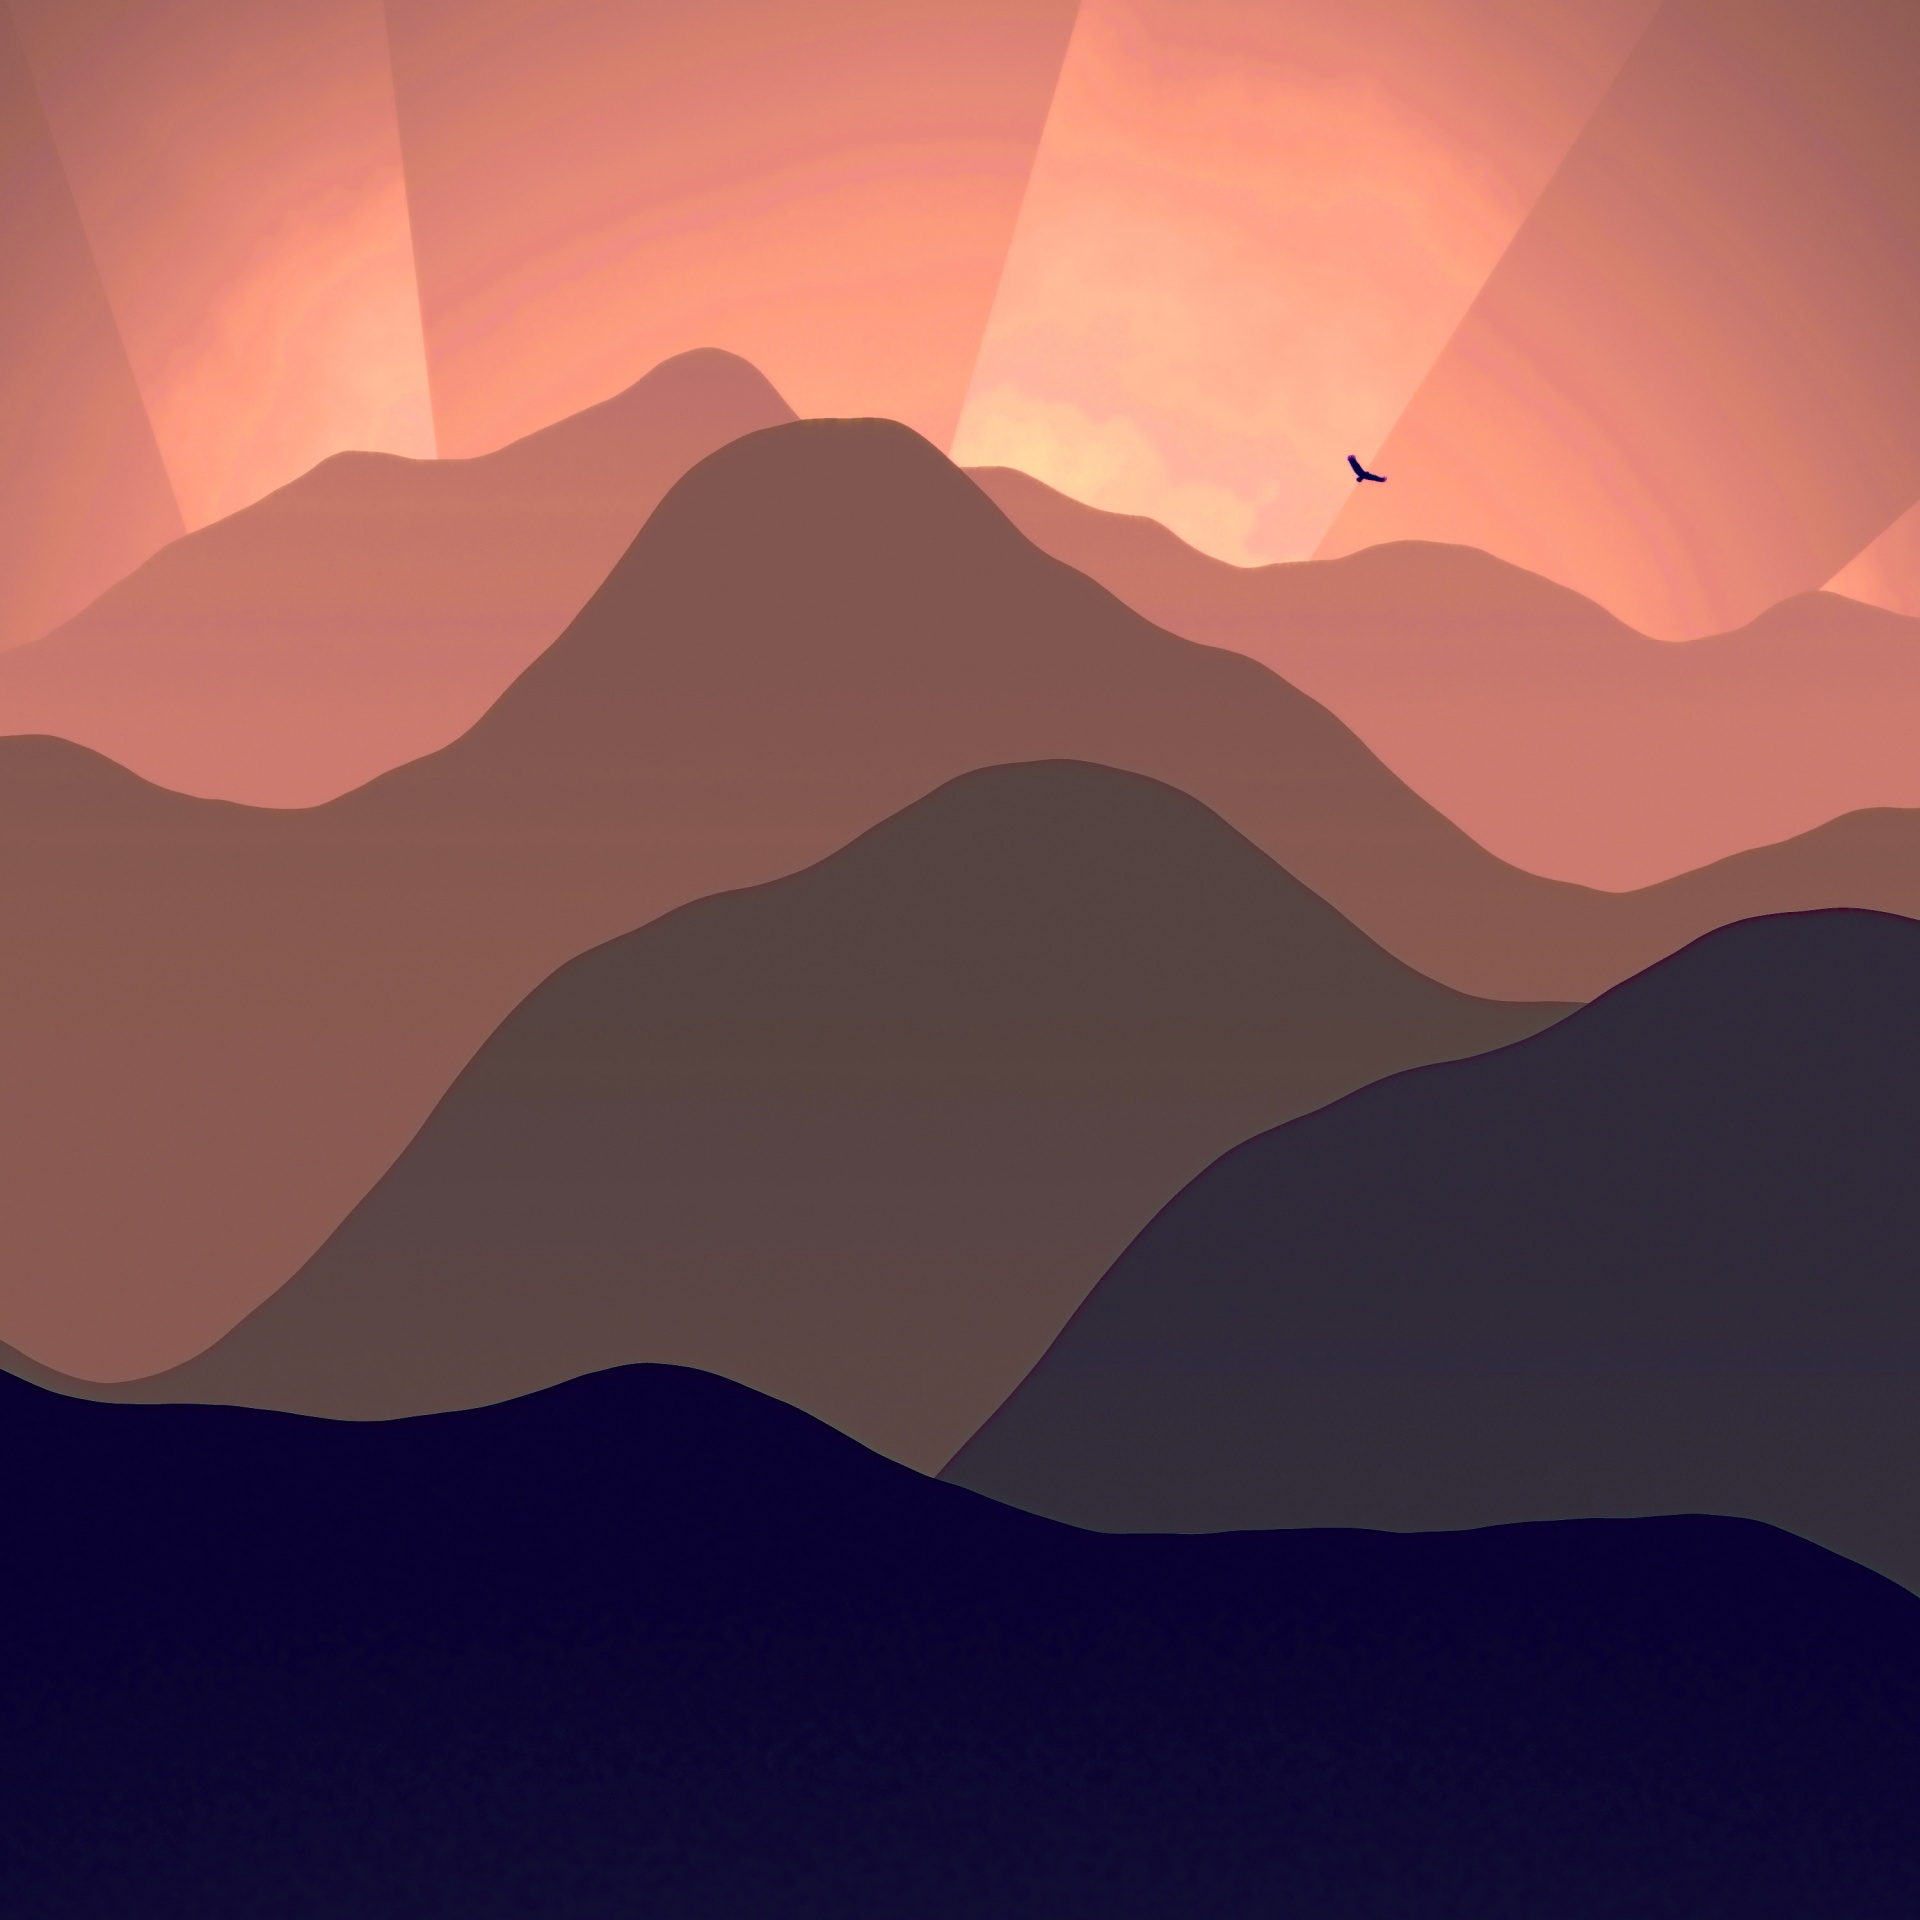 illustration of mountains and sun rays at sunrise or sunset